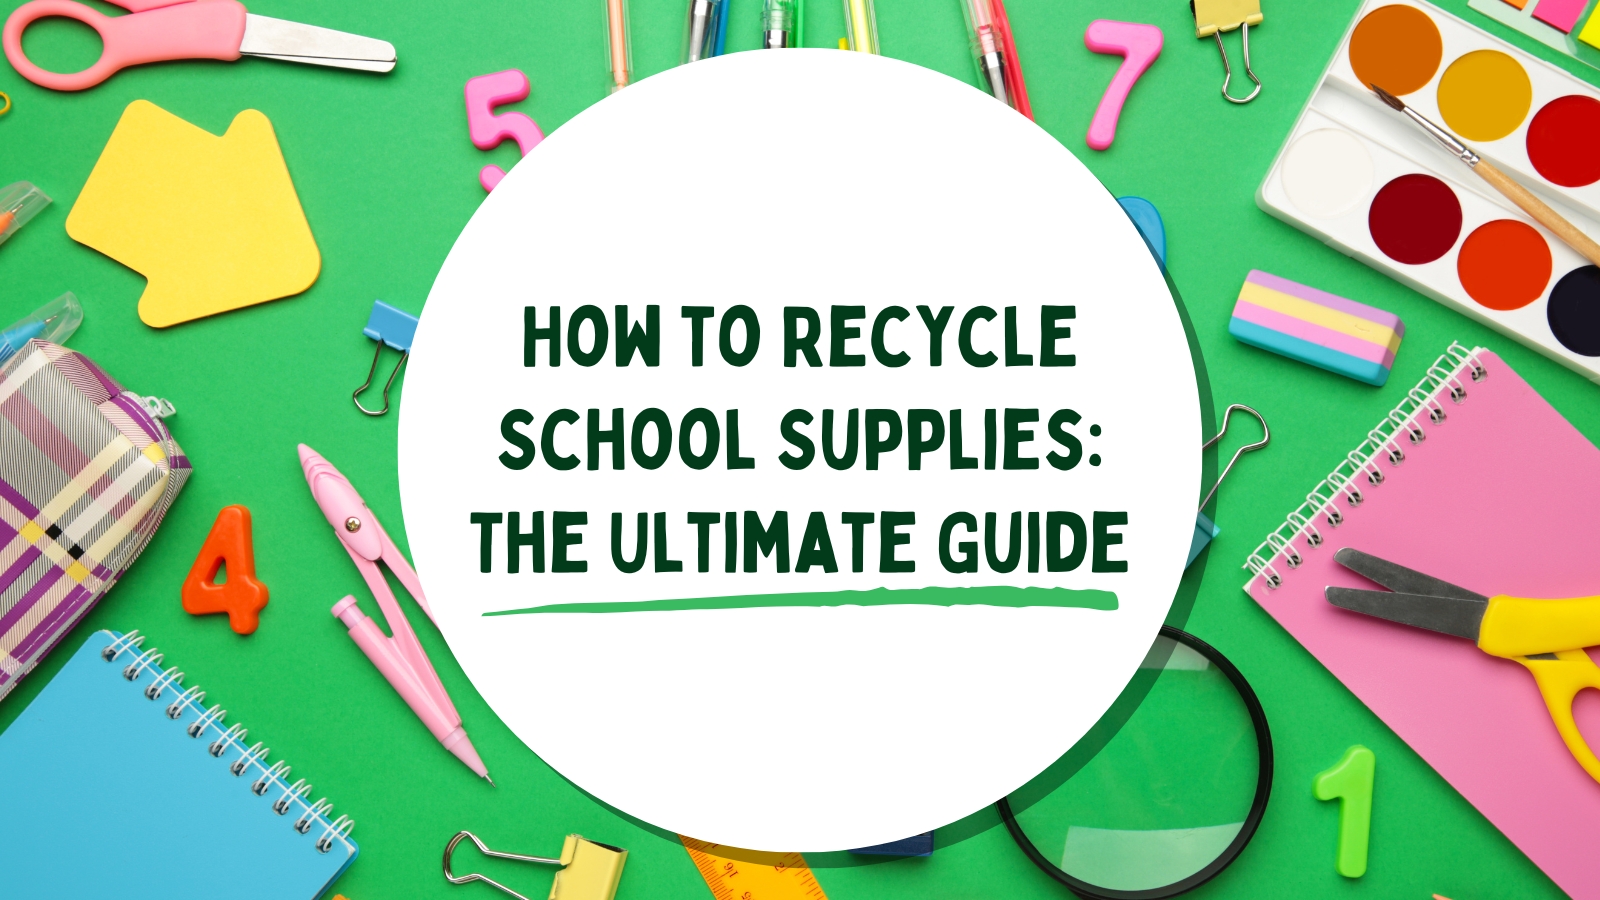 We Are Teachers: How to Recycle School Supplies